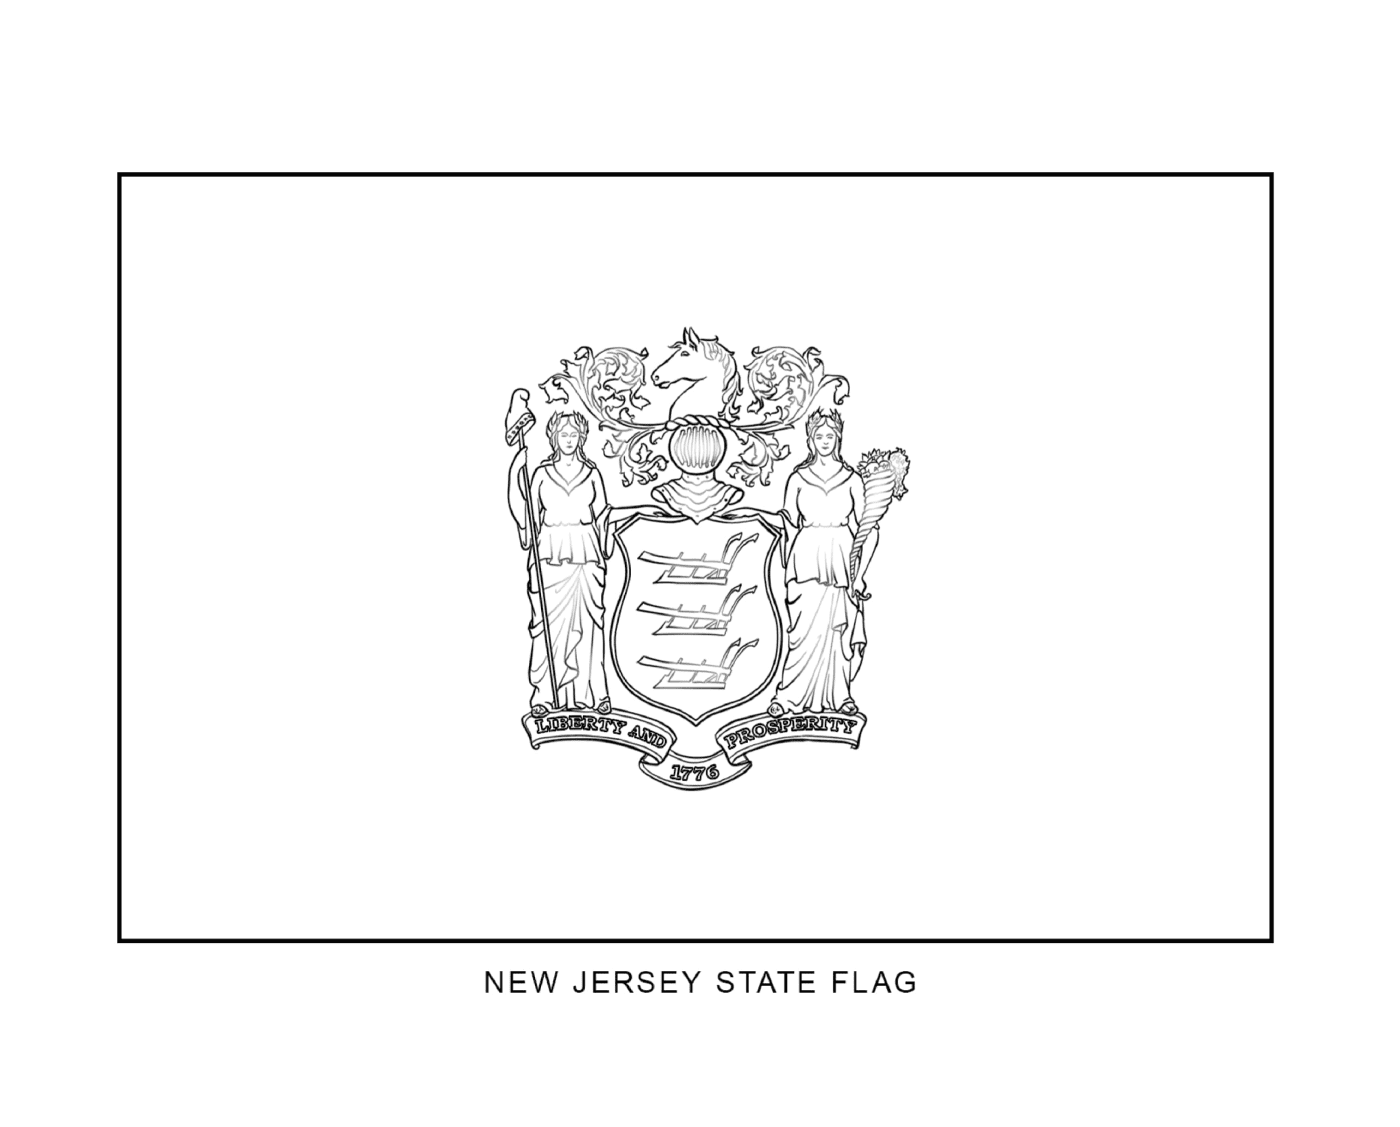  State of New Jersey flag in black and white 